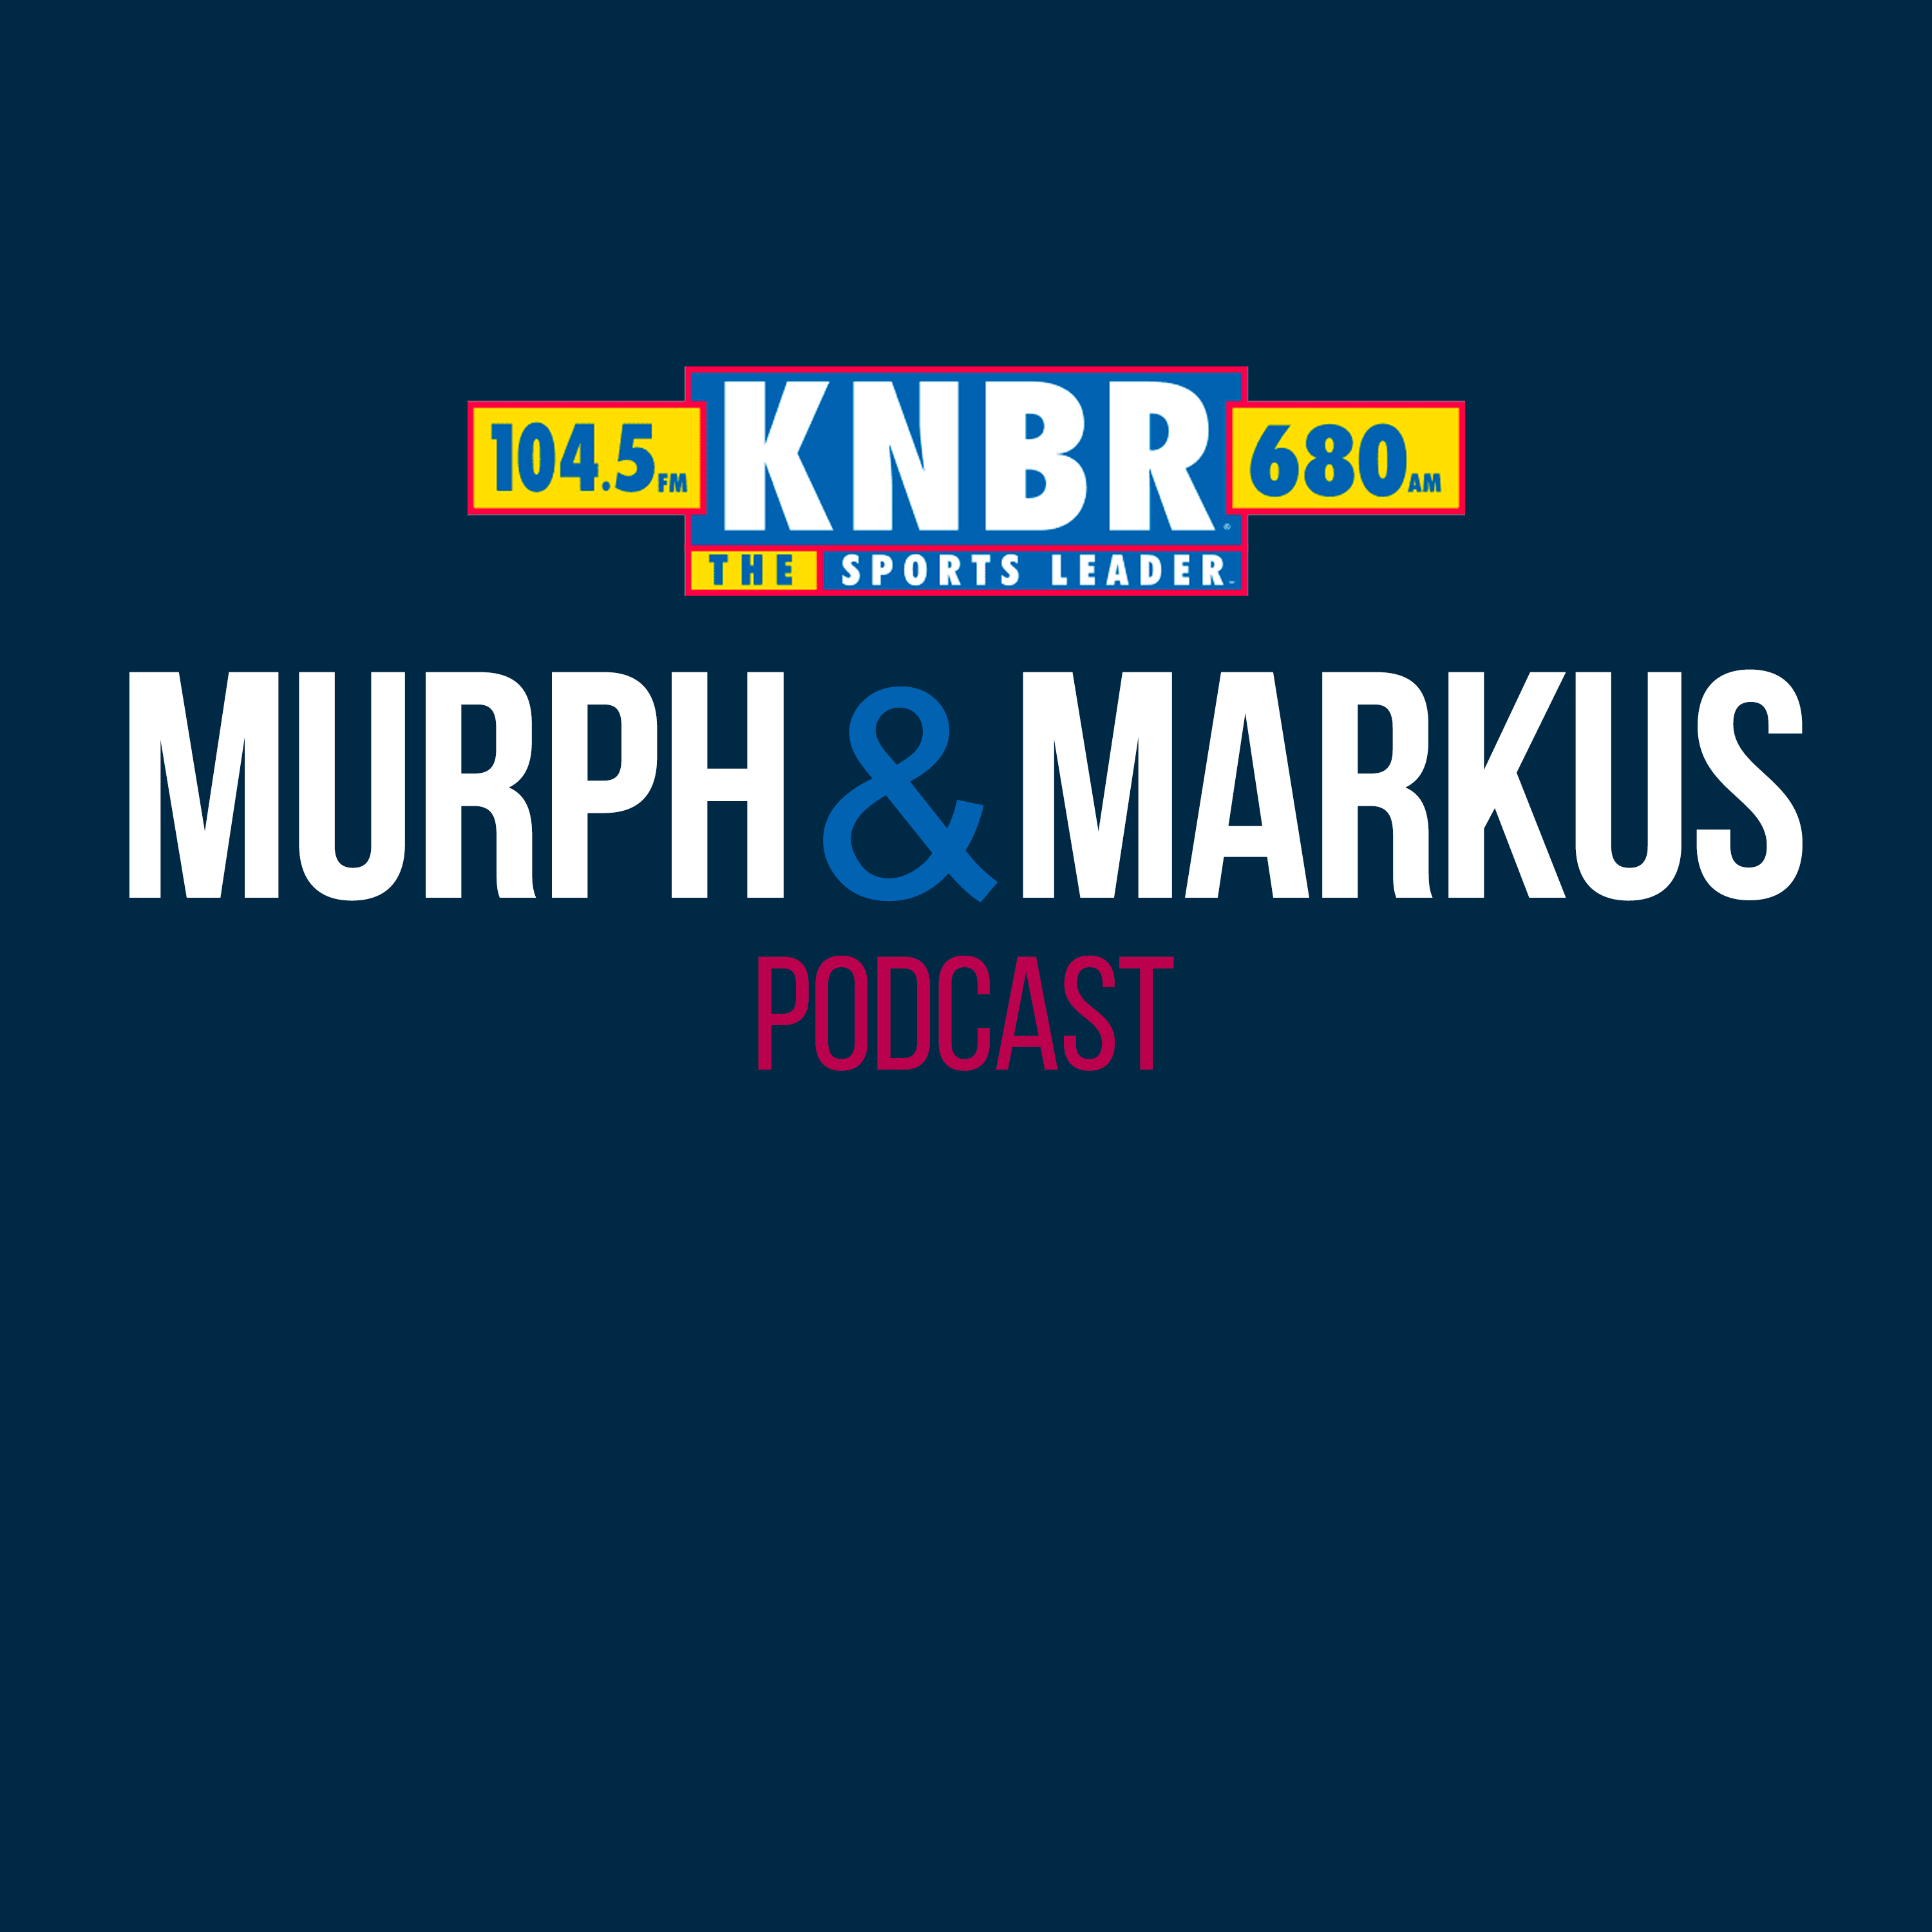 4-11 Hour 2: Murph and Markus preview the Warriors-Blazers matchup and react to the O.J Simpson news